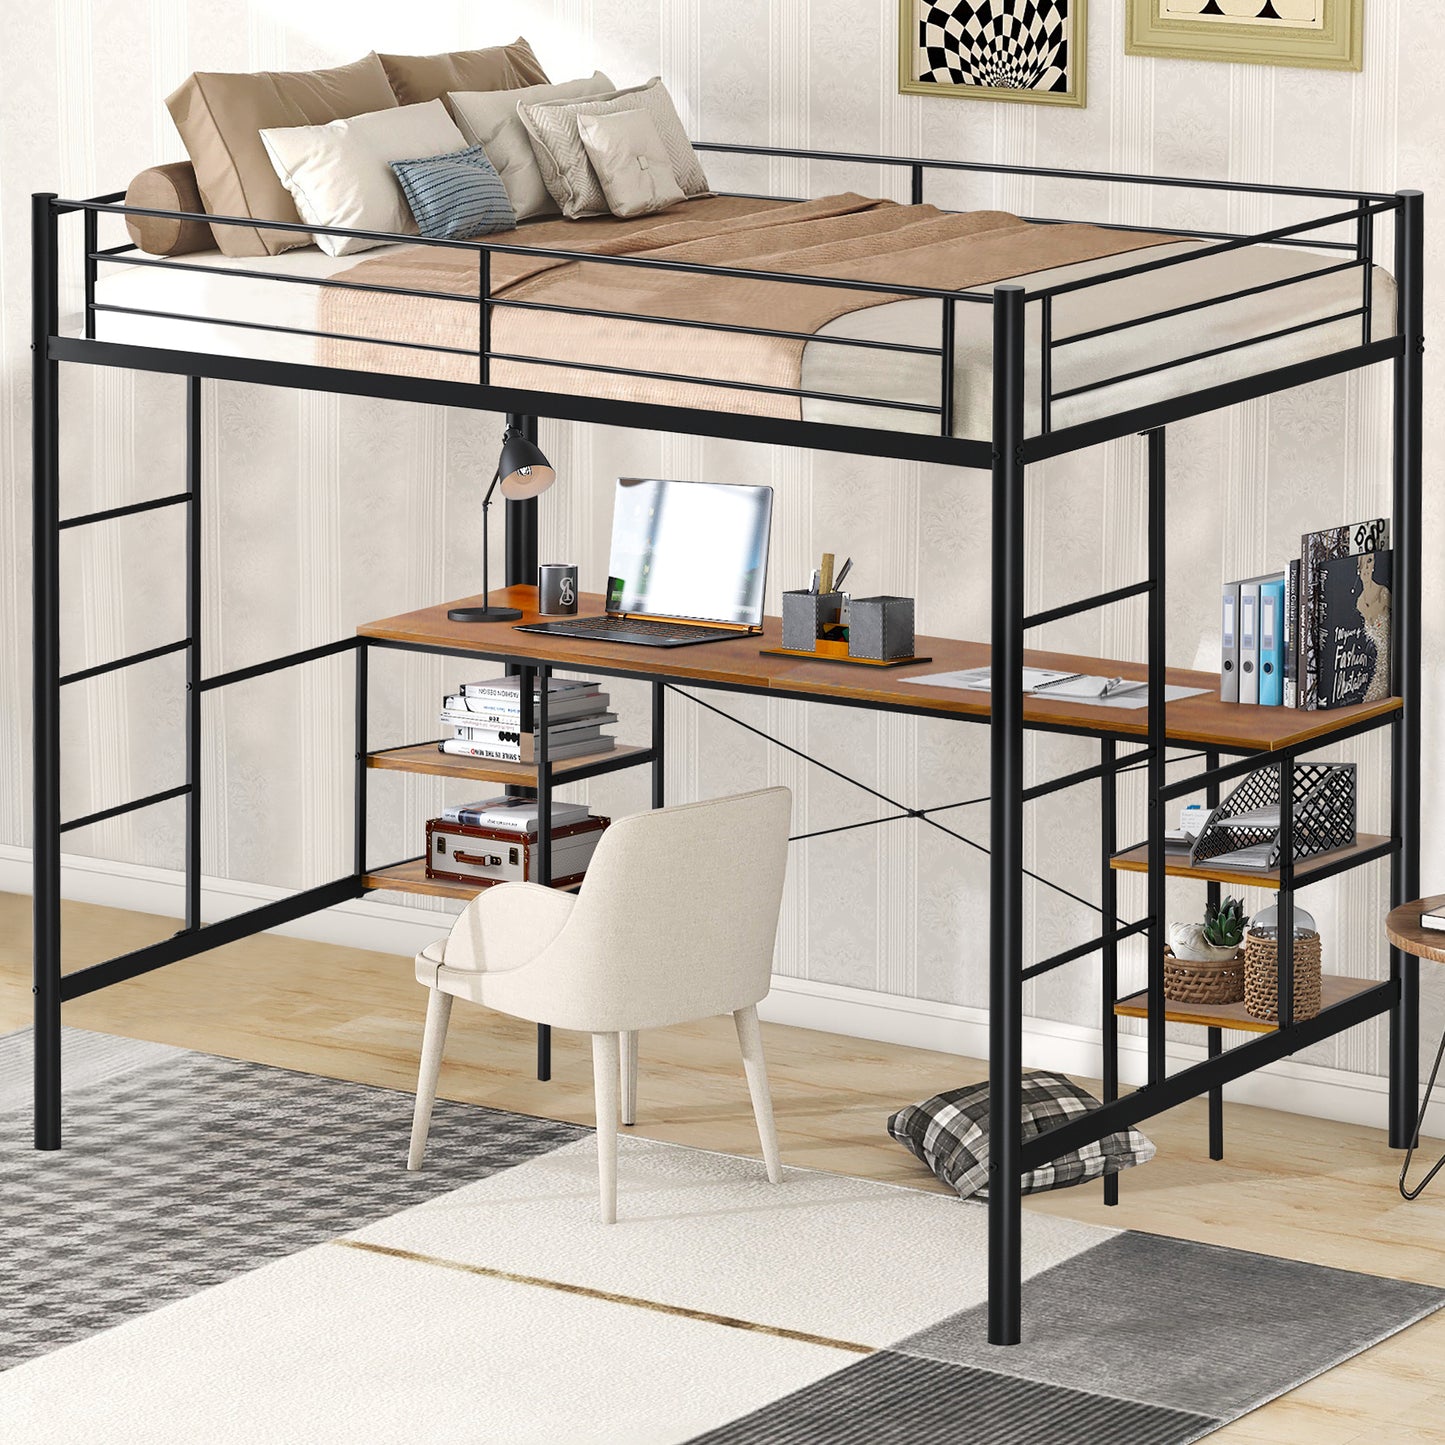 SYNGAR Twin Loft Bed with Desk, Metal Loft Bed with 4 Storage Shelves, Space-Saving Bed Frame with Bilateral Ladders and Safety Guard Rails for Boys Girls Kids Teens Adults, Black